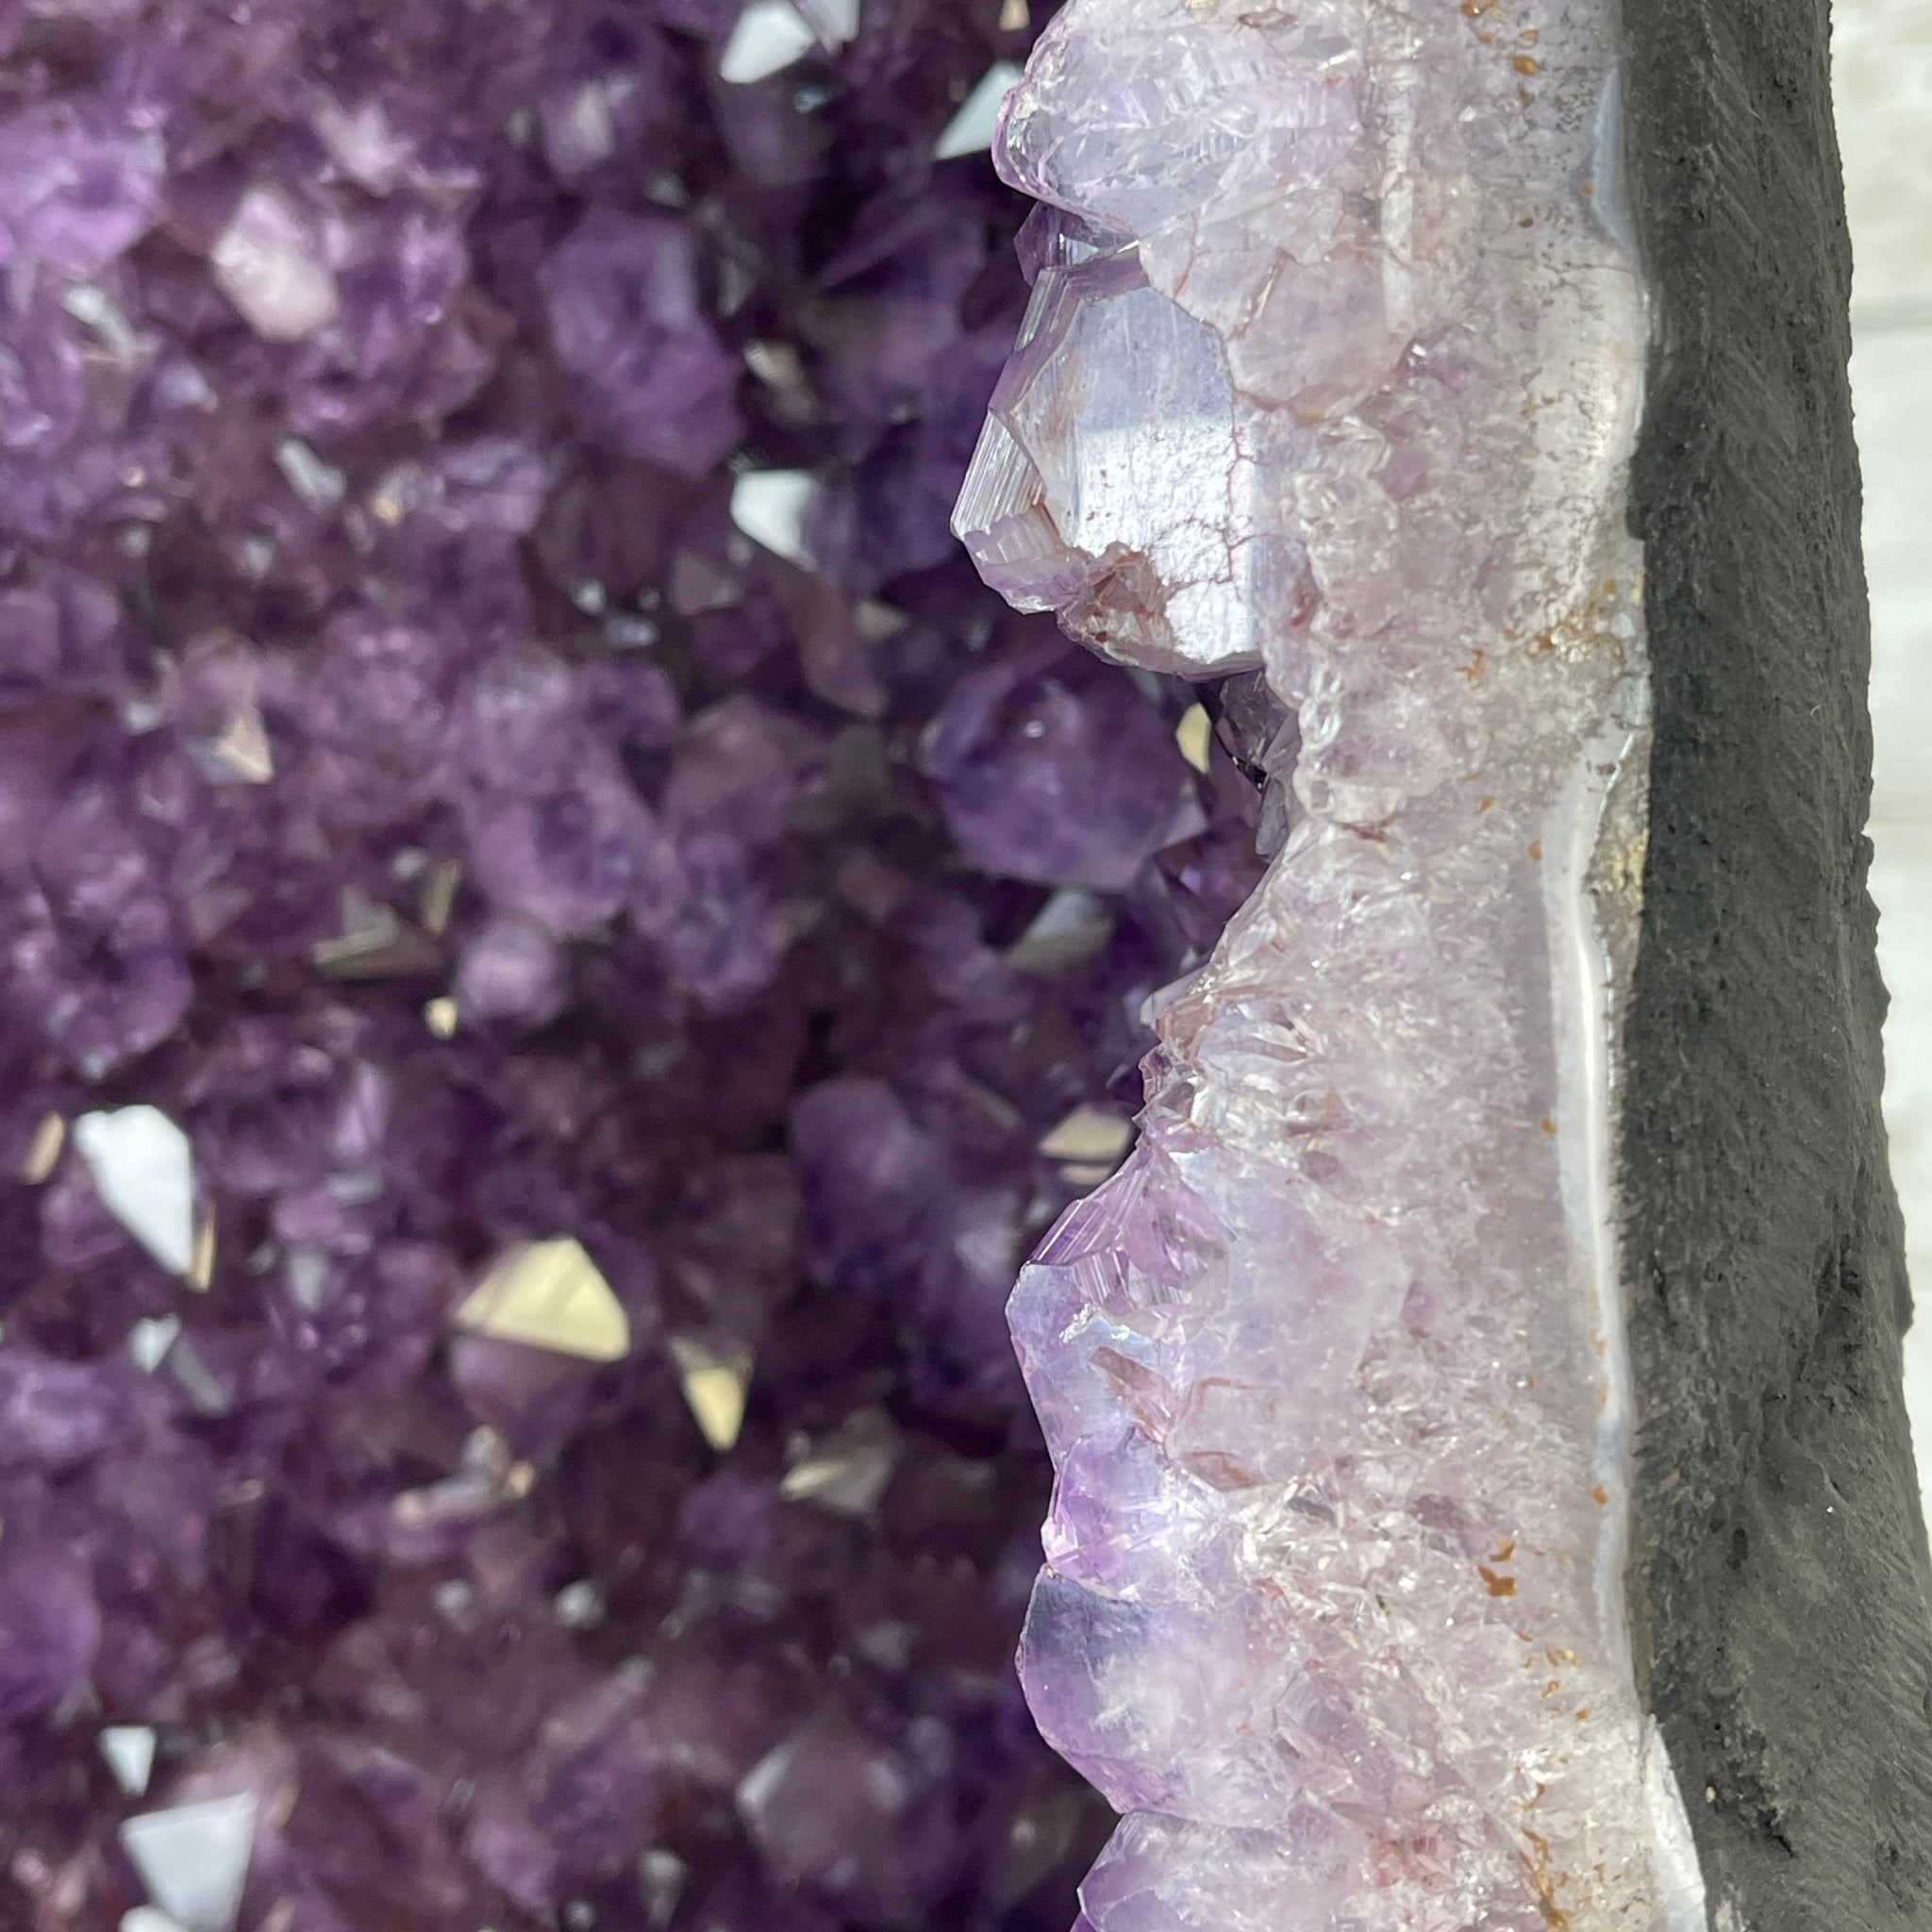 Extra Quality Brazilian Amethyst Cathedral, 23.9” tall & 72.2 lbs #5601-0538 by Brazil Gems - Brazil GemsBrazil GemsExtra Quality Brazilian Amethyst Cathedral, 23.9” tall & 72.2 lbs #5601-0538 by Brazil GemsCathedrals5601-0538